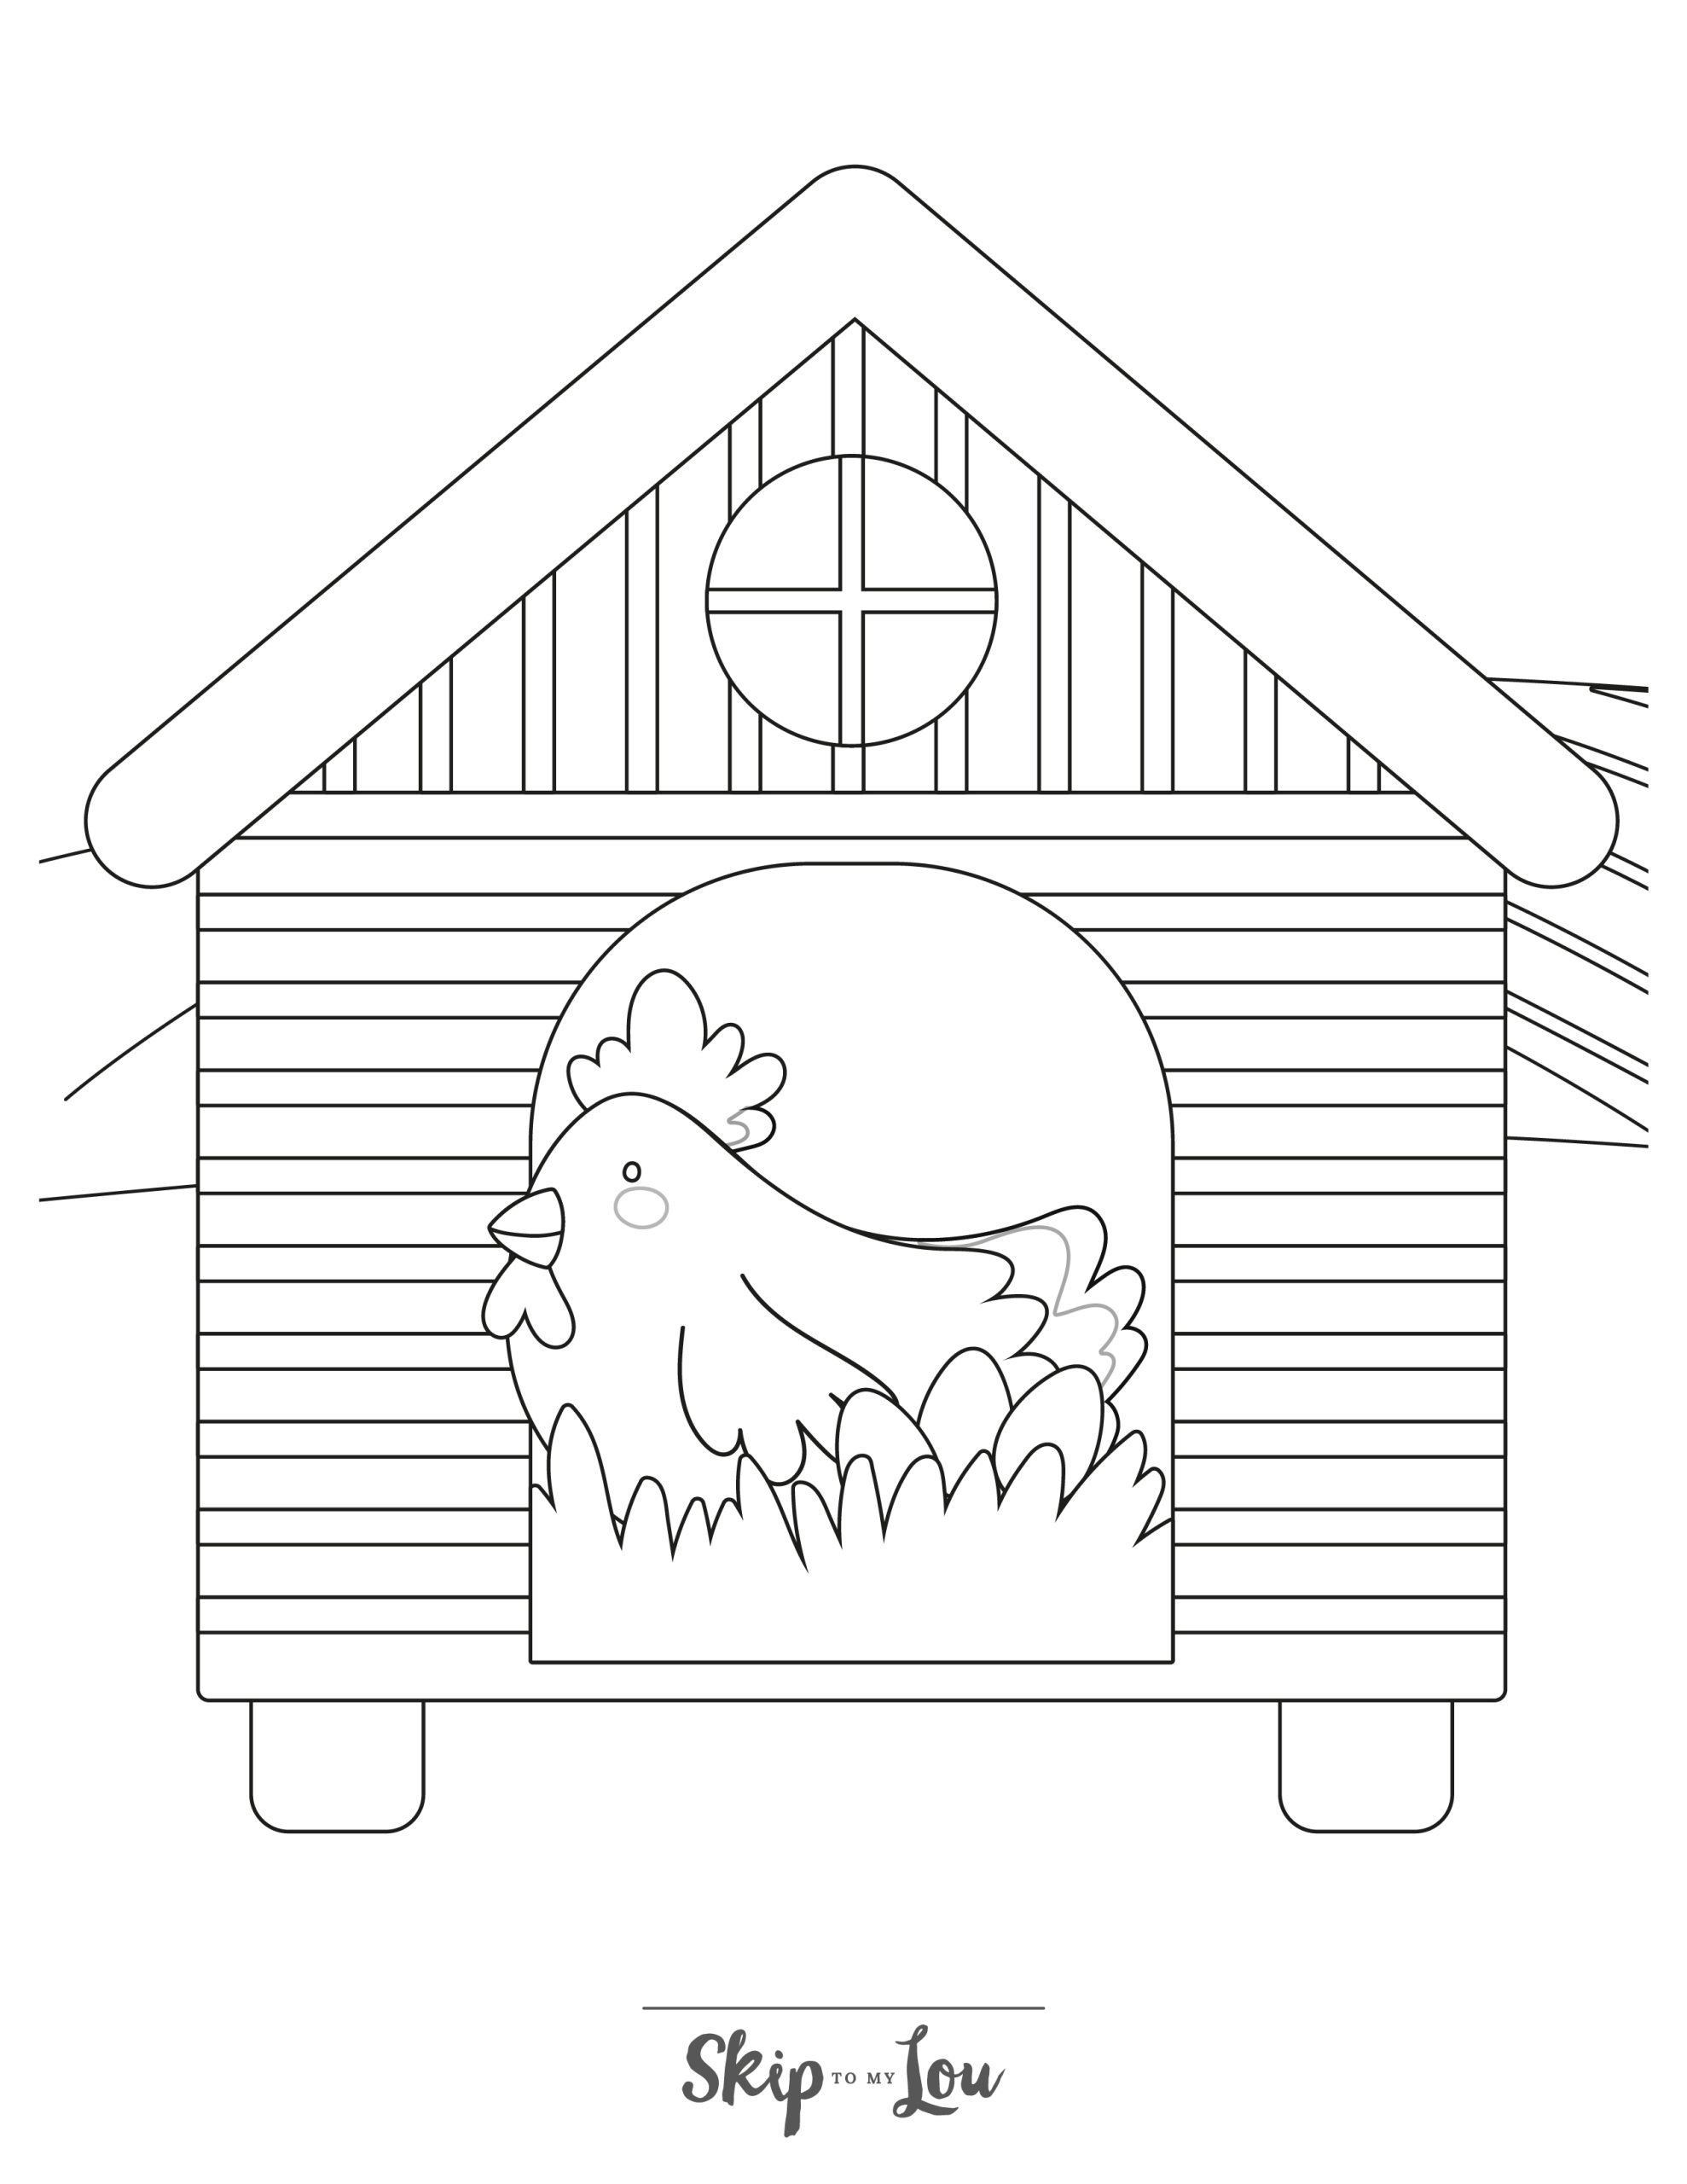 Farm Coloring Page 10 - A line drawing of a large chicken coop with a field in the background. A large chicken with eggs is in the doorway.